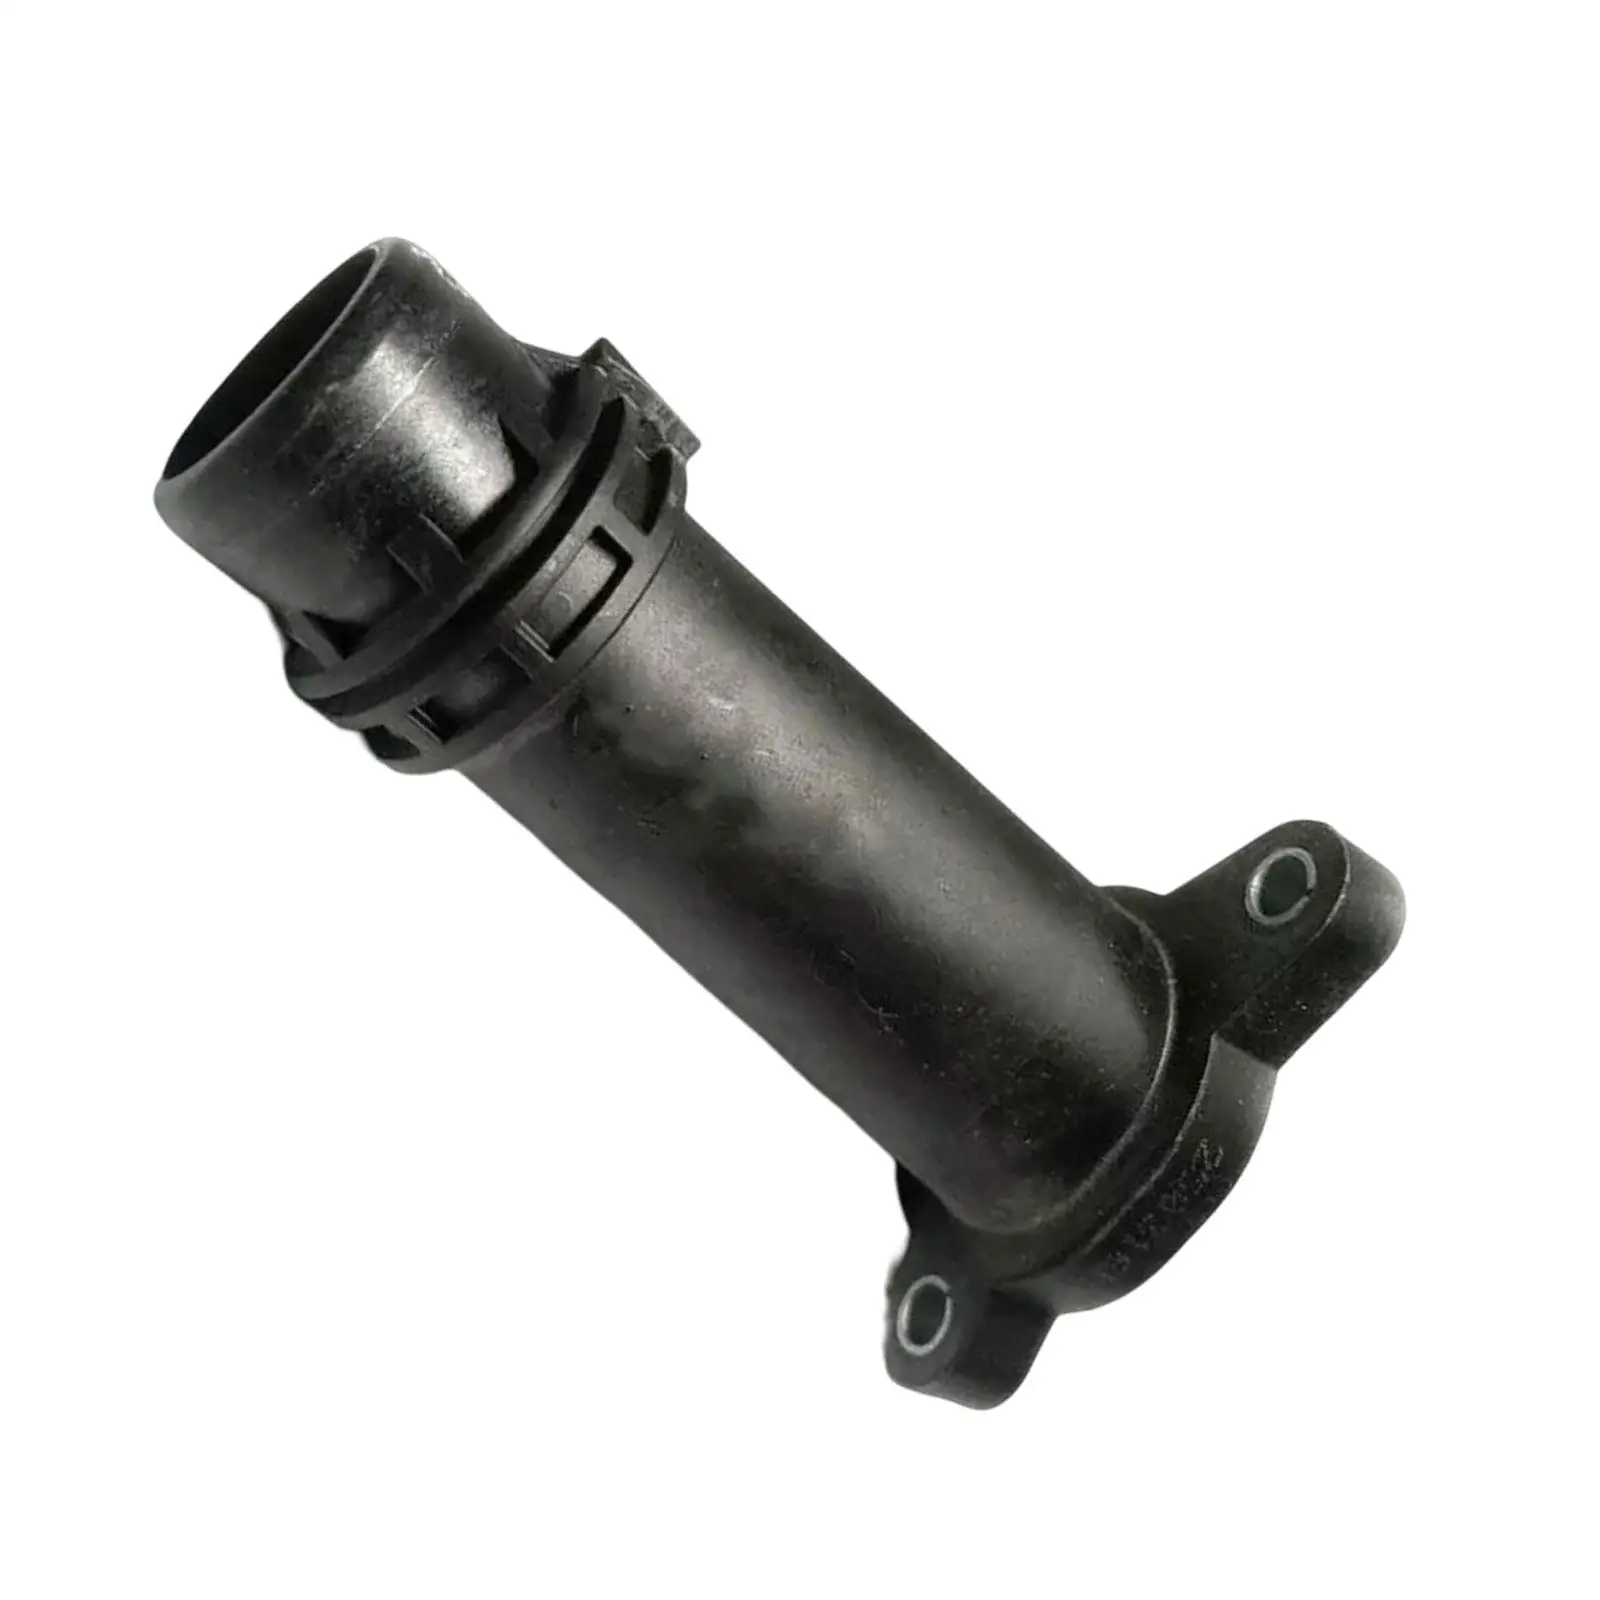 Water Coolant Flange Connect Pipe Tube for BMW 1 2 3 Series F20 F21 F30